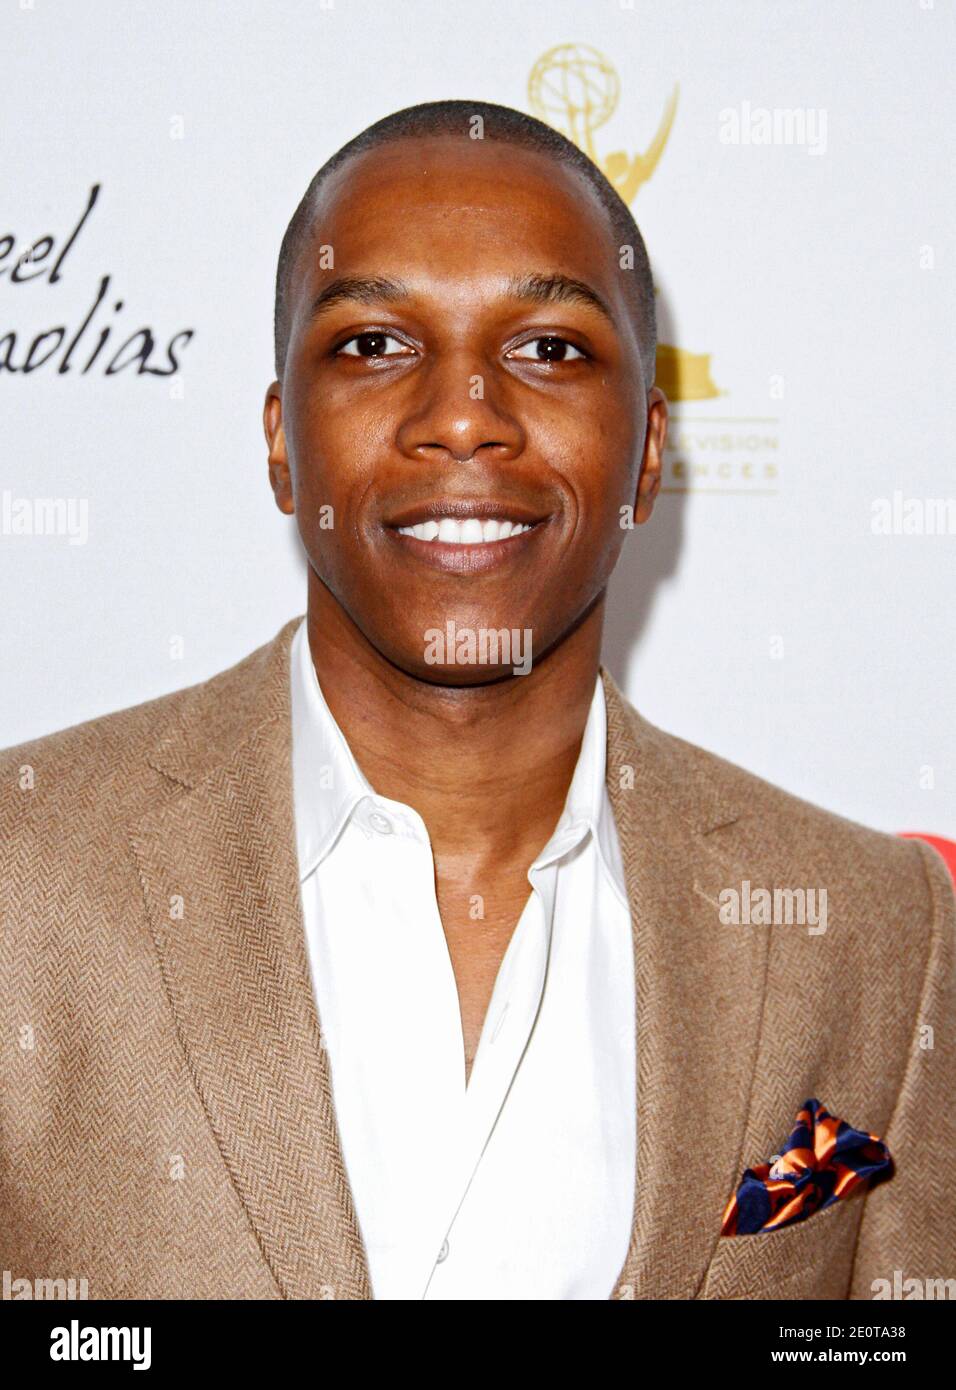 Leslie Odom Jr attends the Steel Magnolias Premiere at the Paris Theater in New York City, NY, USA, on October 3, 2012. Photo by Donna Ward/ABACAPRESS.COM Stock Photo